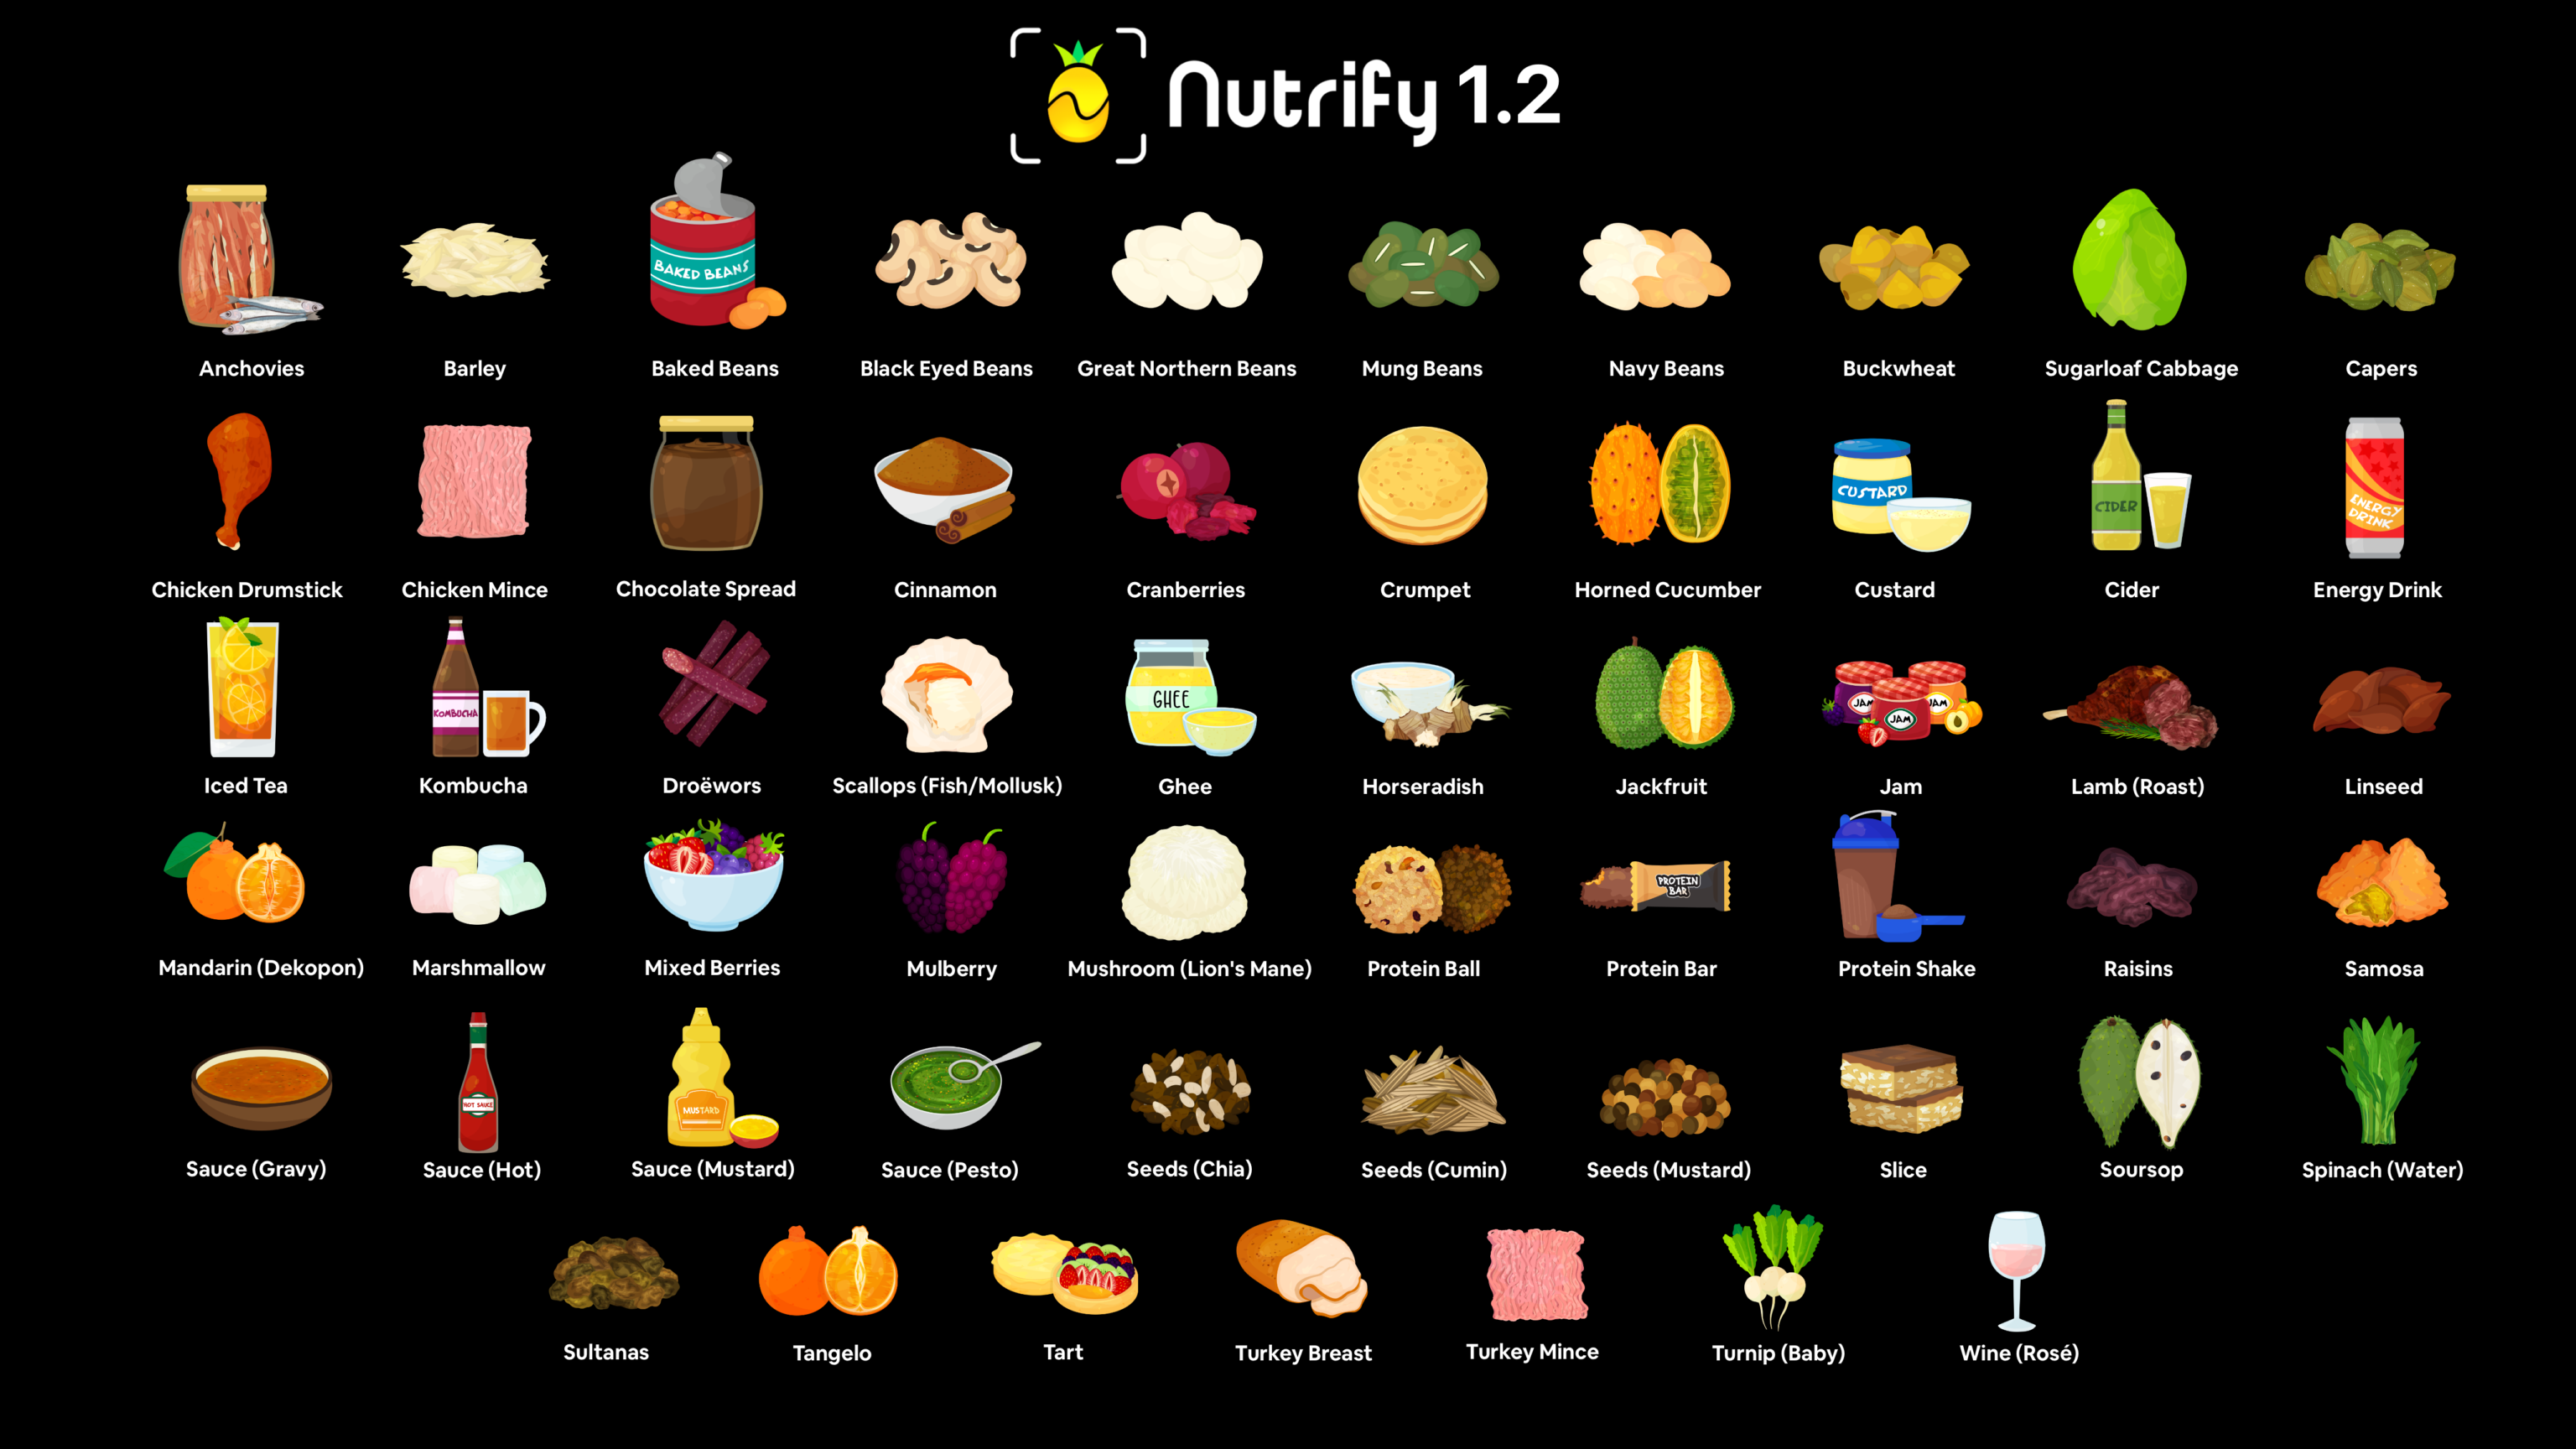 A black background with the title 'Nutrify 1.2' displaying various food icons labeled with their names. The icons include: Anchovies, Barley, Baked Beans, Black Eyed Beans, Great Northern Beans, Mung Beans, Navy Beans, Buckwheat, Sugarloaf Cabbage, Capers, Chicken Drumstick, Chicken Mince, Chocolate Spread, Cinnamon, Cranberries, Crumpet, Horned Cucumber, Custard, Cider, Energy Drink, Iced Tea, Kombucha, Droëwors, Scallops (Fish/Mollusk), Ghee, Horseradish, Jackfruit, Jam, Lamb (Roast), Linseed, Mandarin (Dekopon), Marshmallow, Mixed Berries, Mulberry, Mushroom (Lion's Mane), Protein Ball, Protein Bar, Protein Shake, Raisins, Samosa, Sauce (Gravy), Sauce (Hot), Sauce (Mustard), Sauce (Pesto), Seeds (Chia), Seeds (Cumin), Seeds (Mustard), Slice, Soursop, Spinach (Water), Sultanas, Tangelo, Tart, Turkey Breast, Turkey Mince, Turnip (Baby), Wine (Rosé).